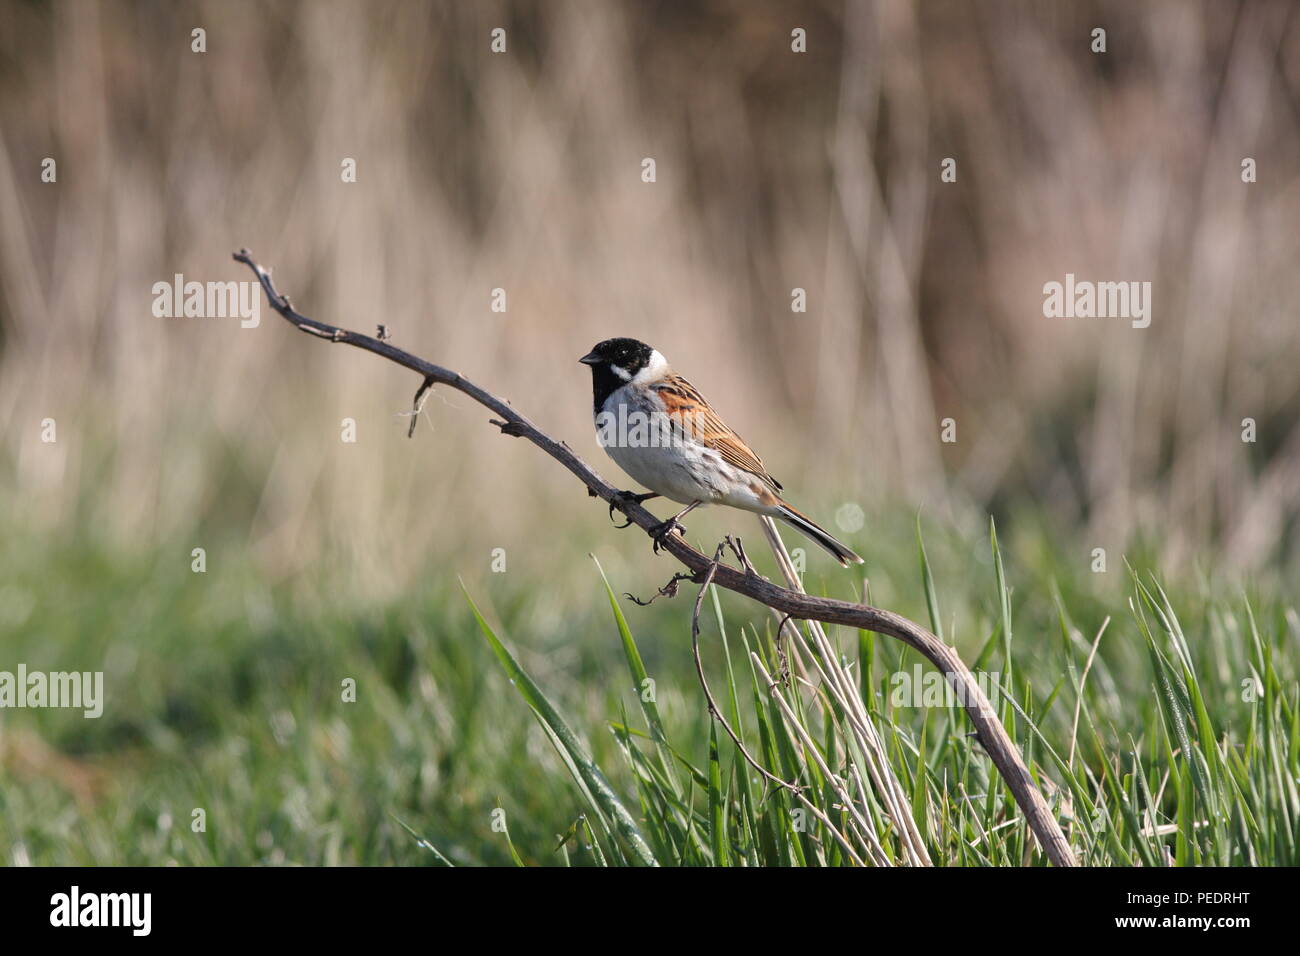 Emberiza schoeniclus, Reed Bunting, standing on a dead stem, in full view showing identifying features. Stock Photo